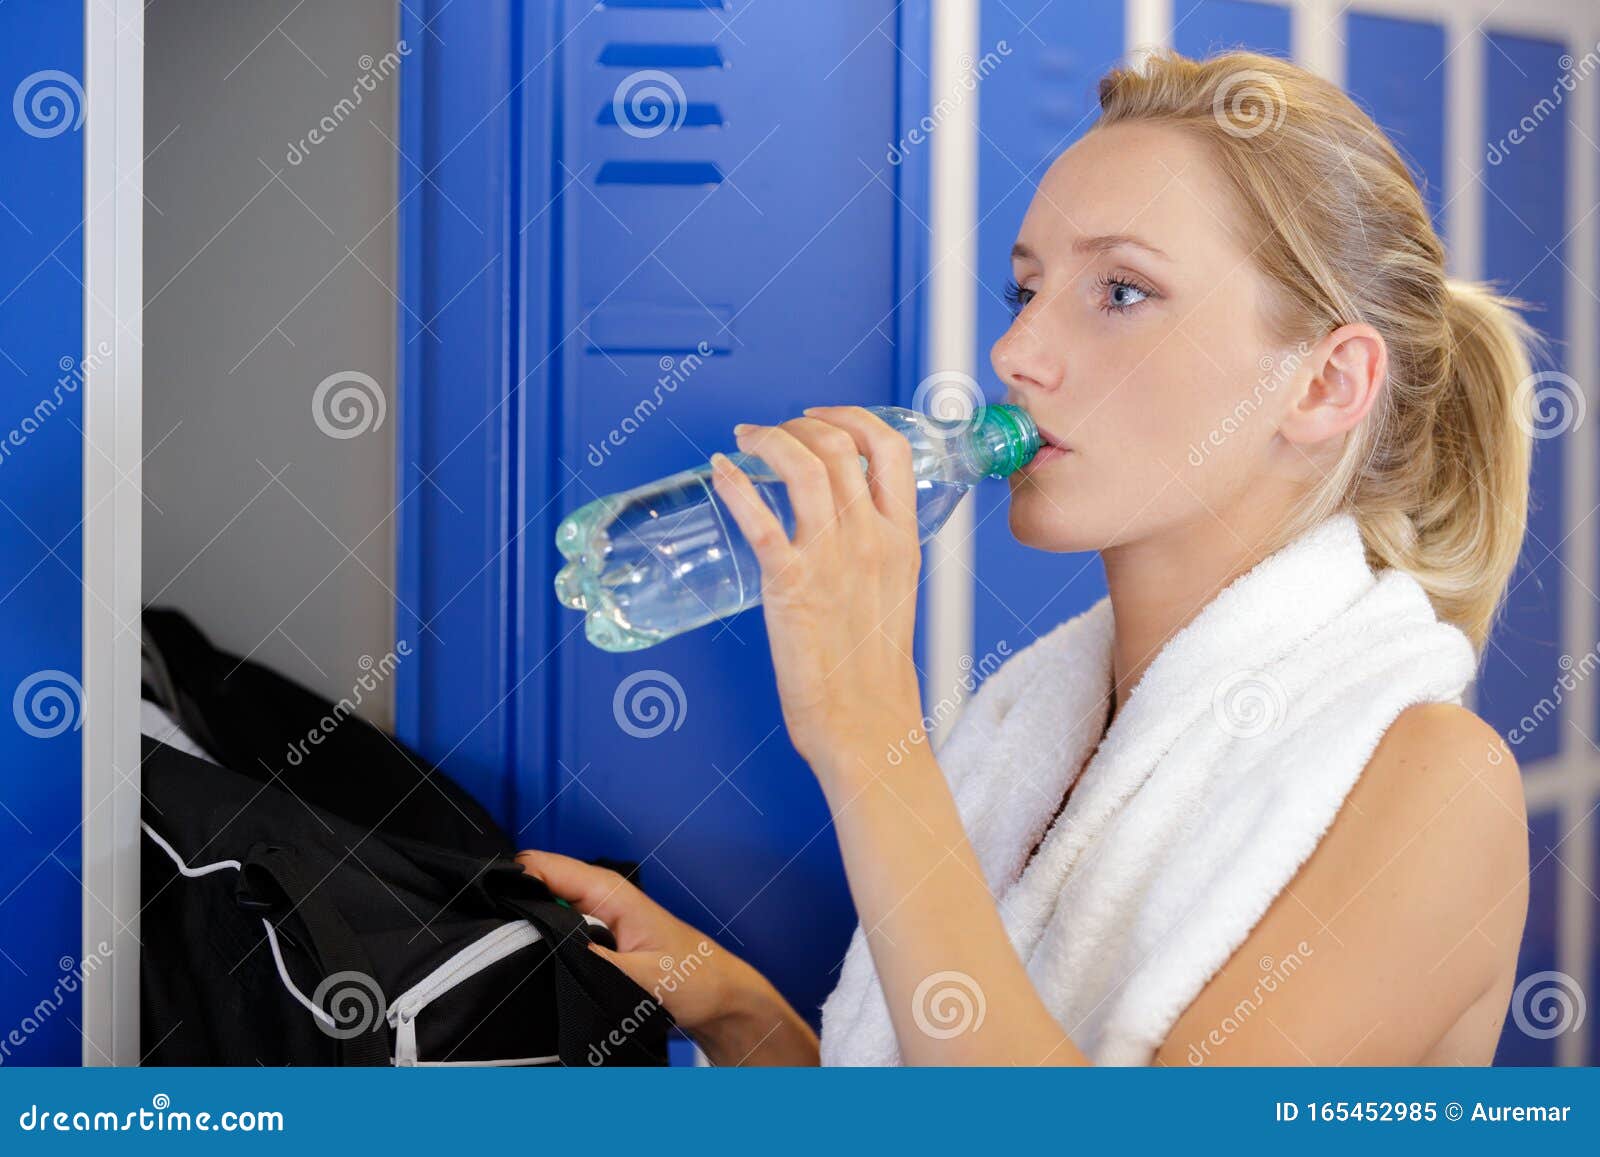 Woman Ready For Workout In Gym Locker Room Stock Image Image Of Cheerful Physical 165452985